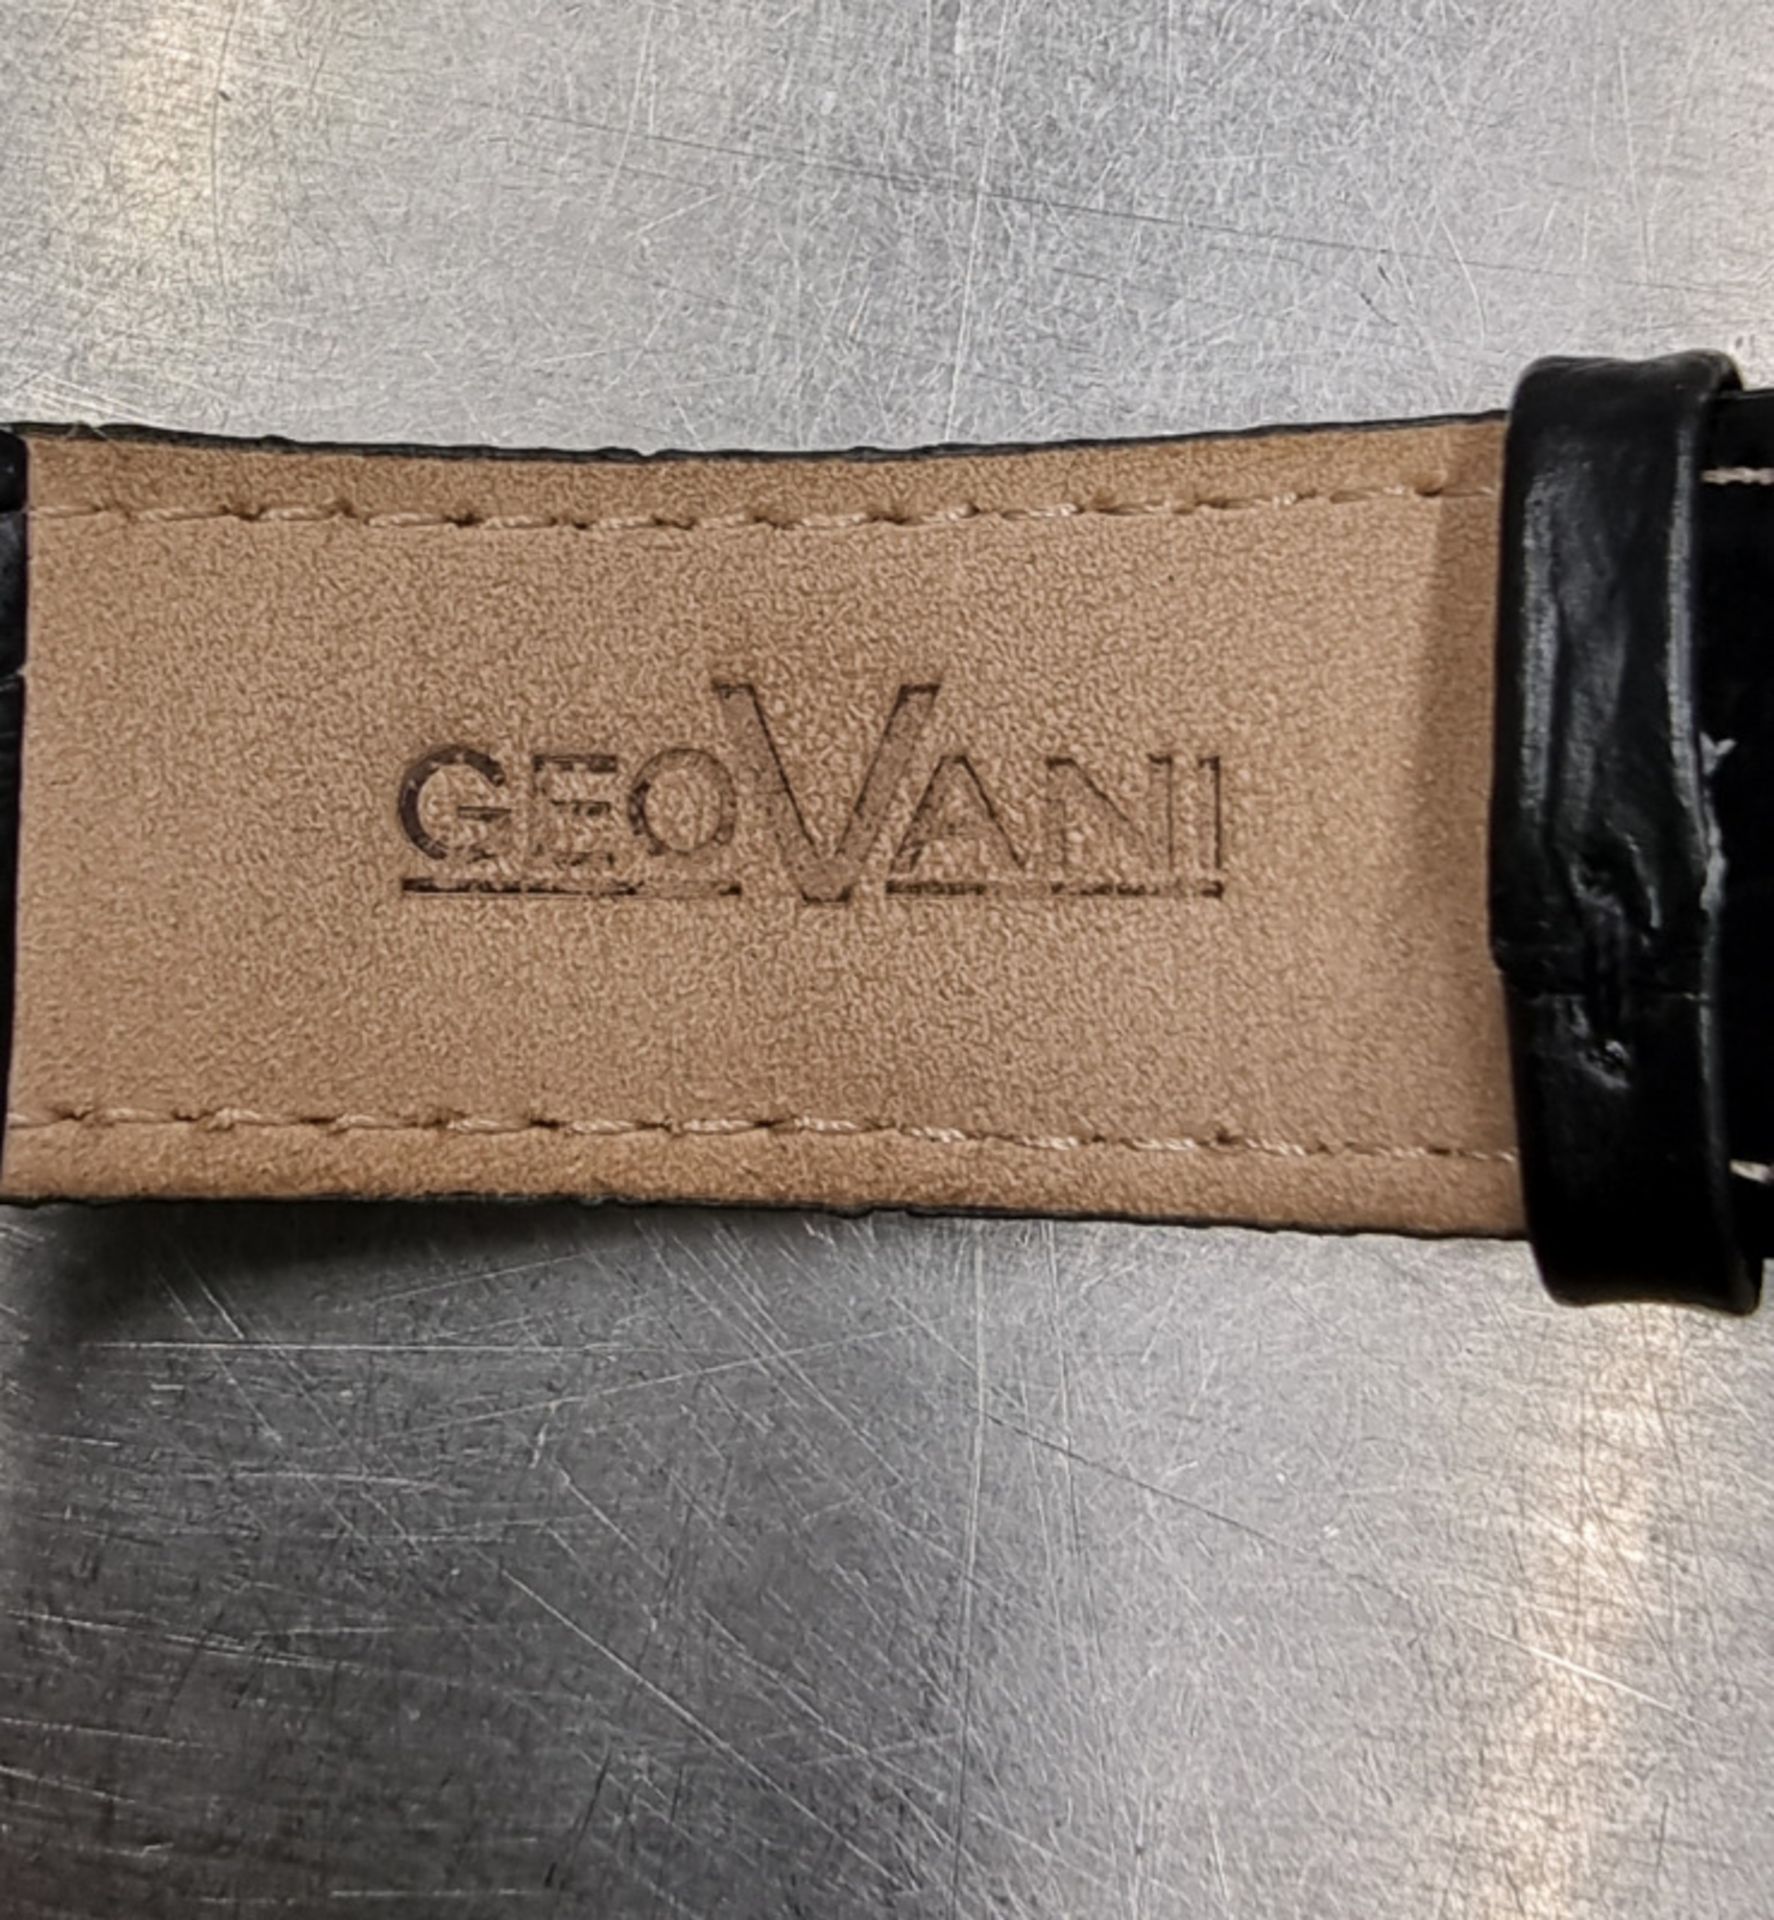 Geovani GOR541 Stainless Steel Water Resistant (5ATM) Wrist Watch with Genuine 22 Leather Strap - Image 9 of 9